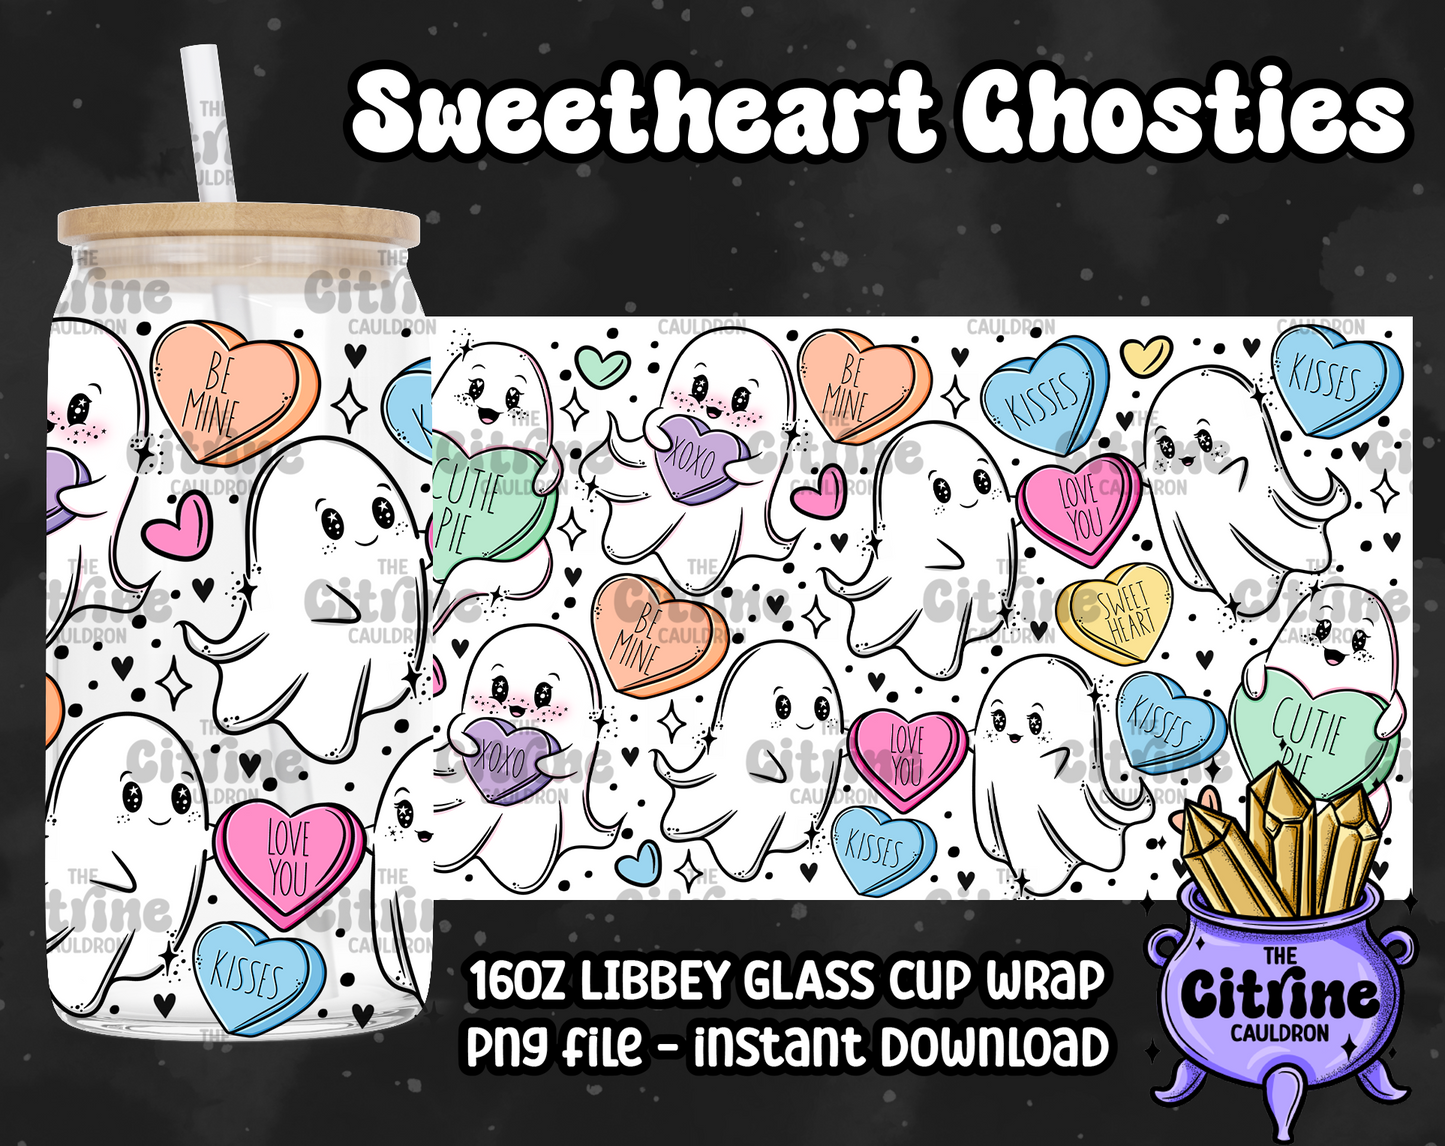 Sweetheart Ghosties - PNG Wrap for Libbey 16oz Glass Can